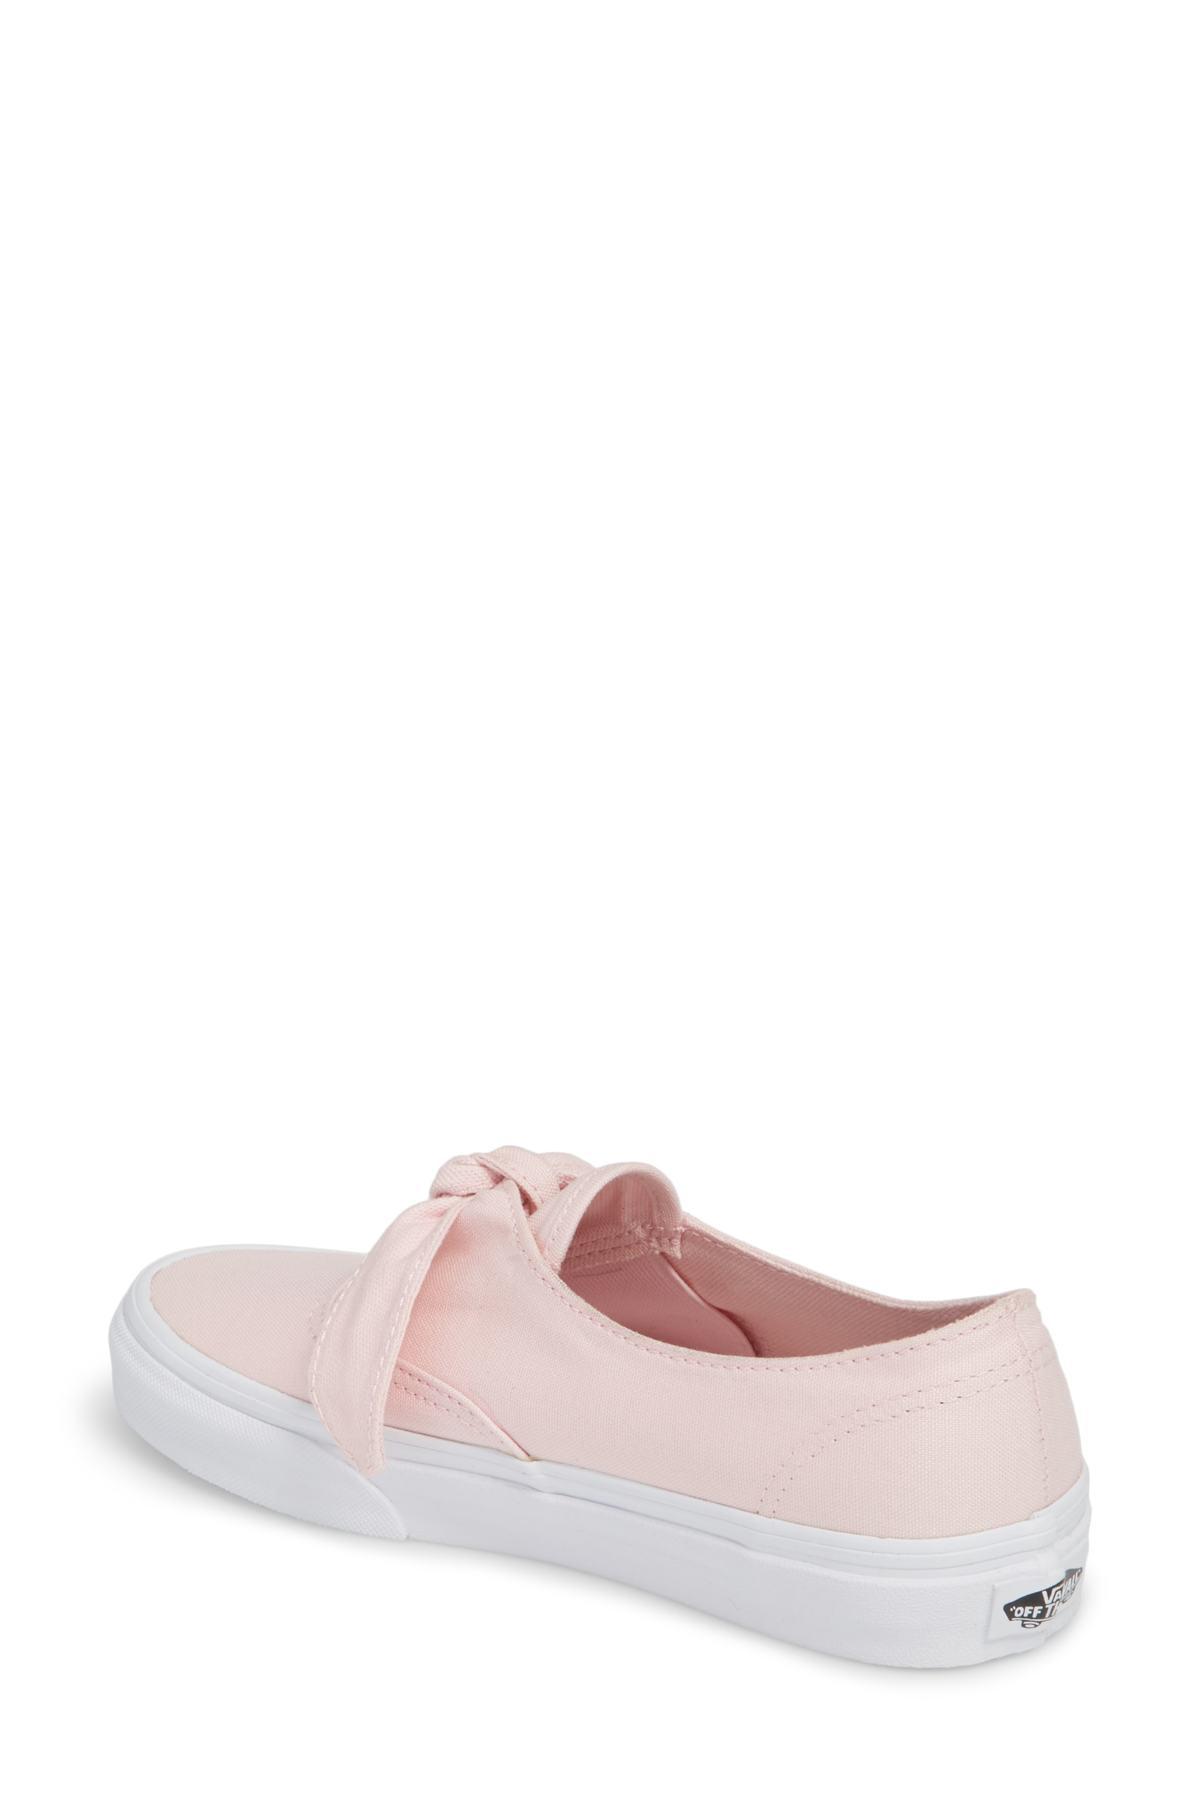 Vans Ua Authentic Bow Slip-on Sneaker in Pink | Lyst